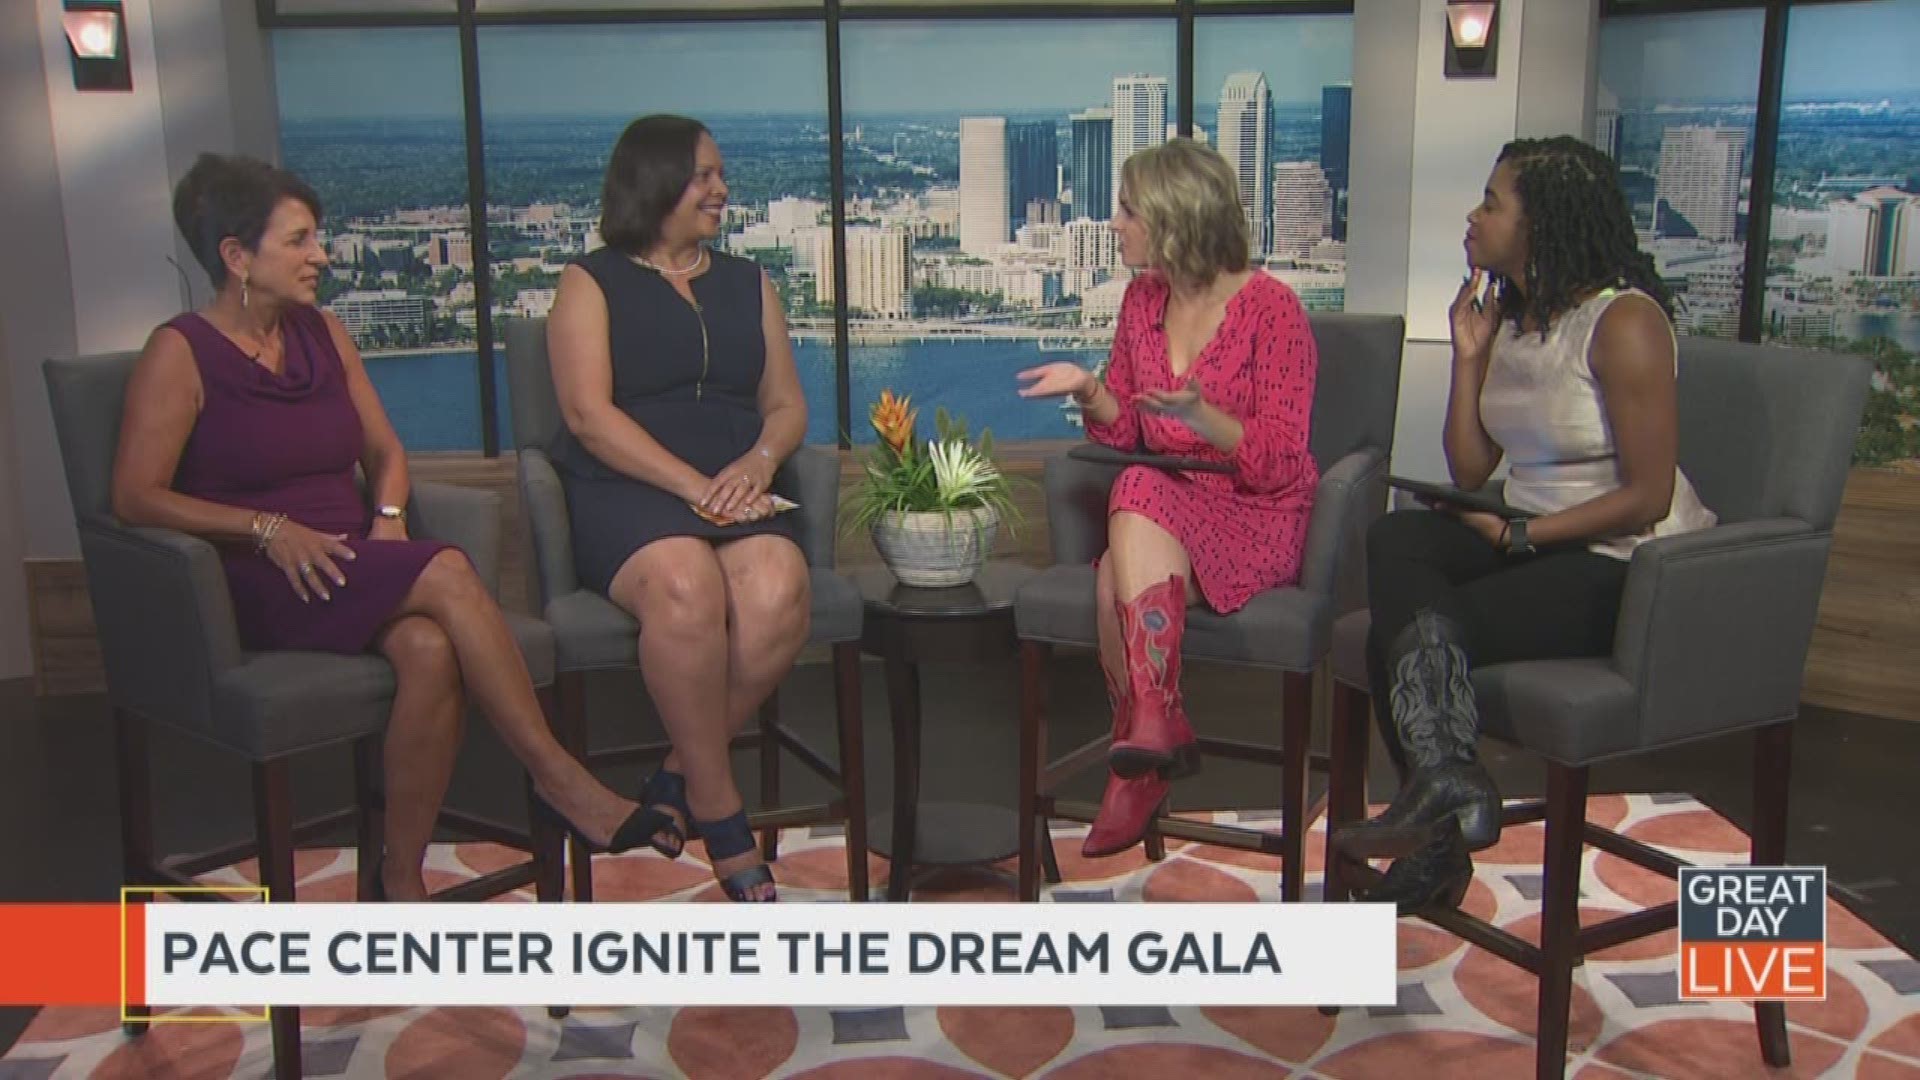 To learn more about the Ignite the Dream Gala, go to pacecenter.org/Pinellas-ignite-the-dream-gala.